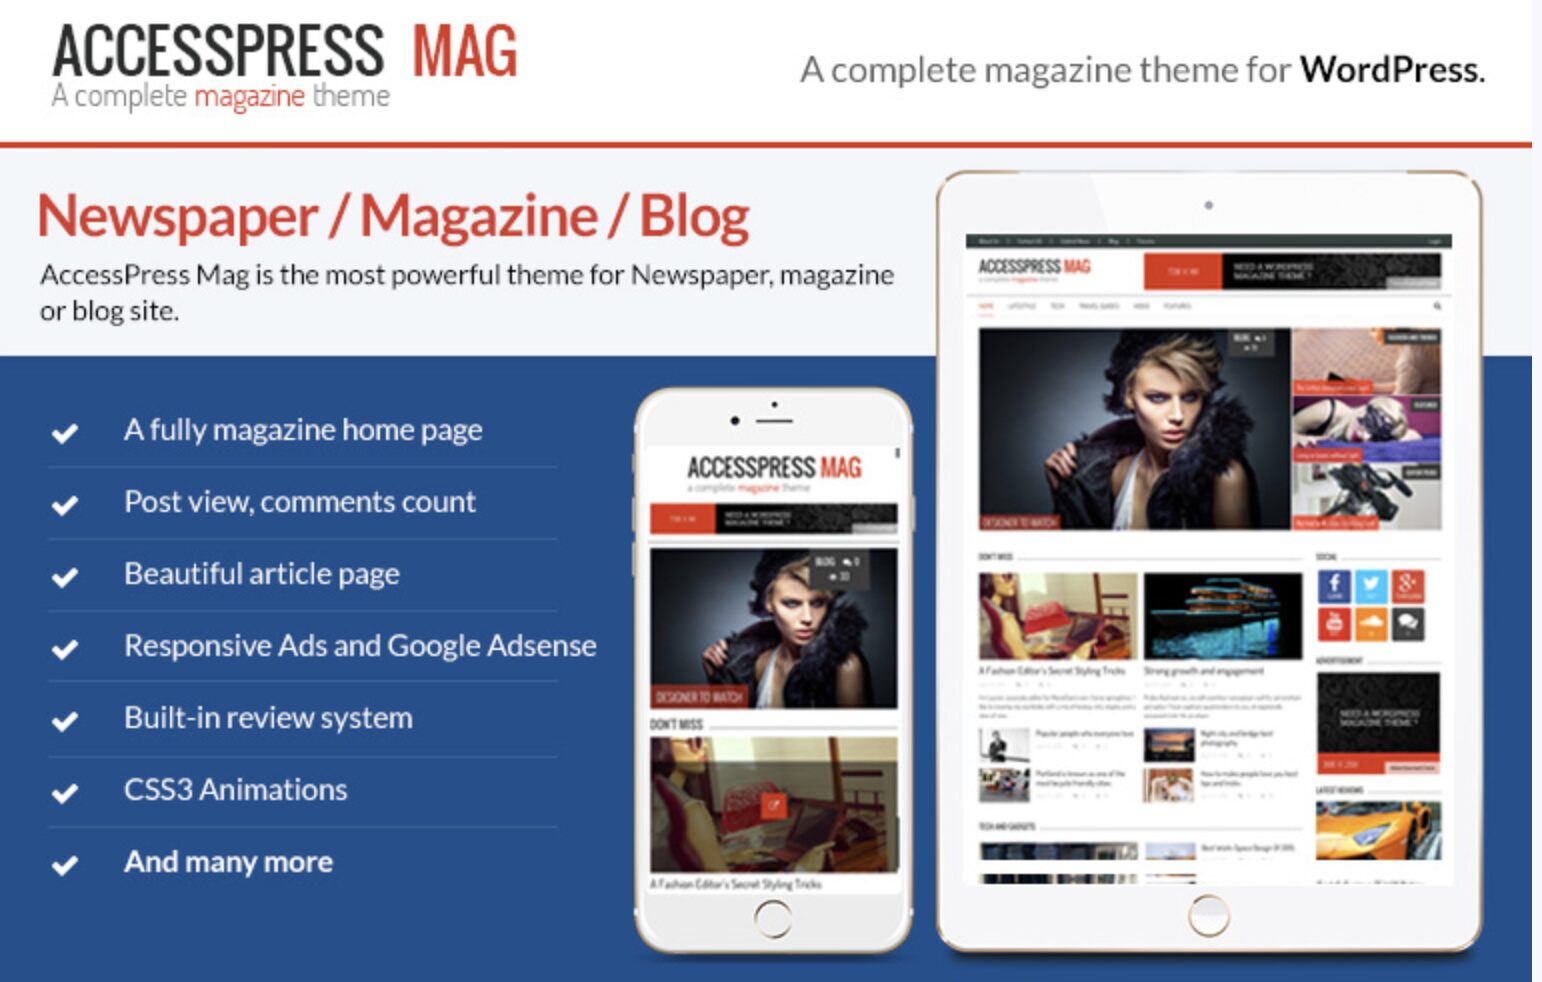 This theme features a news ticker, author block, two-post layout, sticky menu, and large images for pages/posts, along with social media integration.